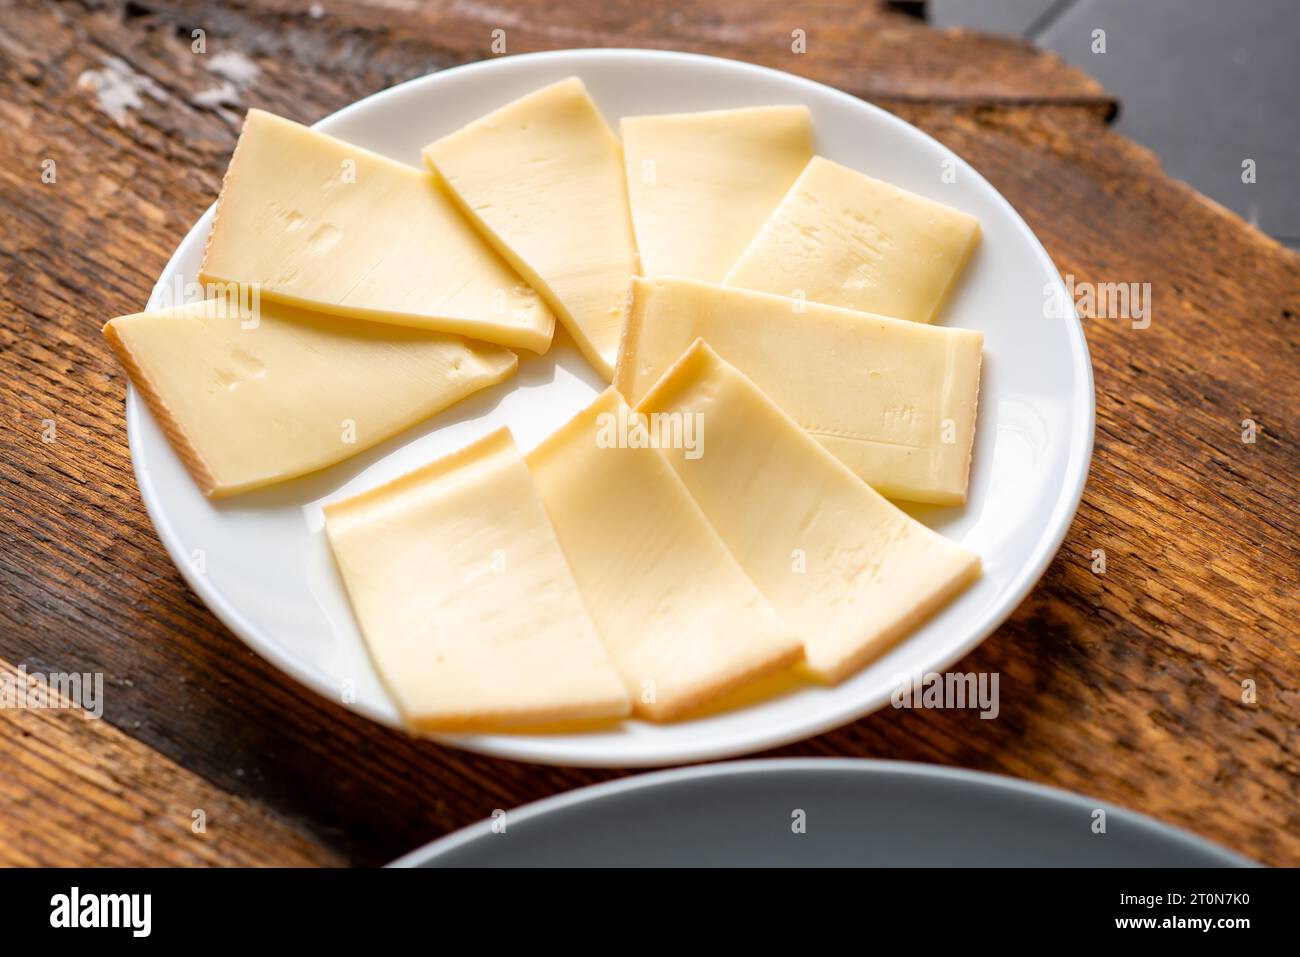 Plate with slices of sliced cheese on wooden background Stock Photo